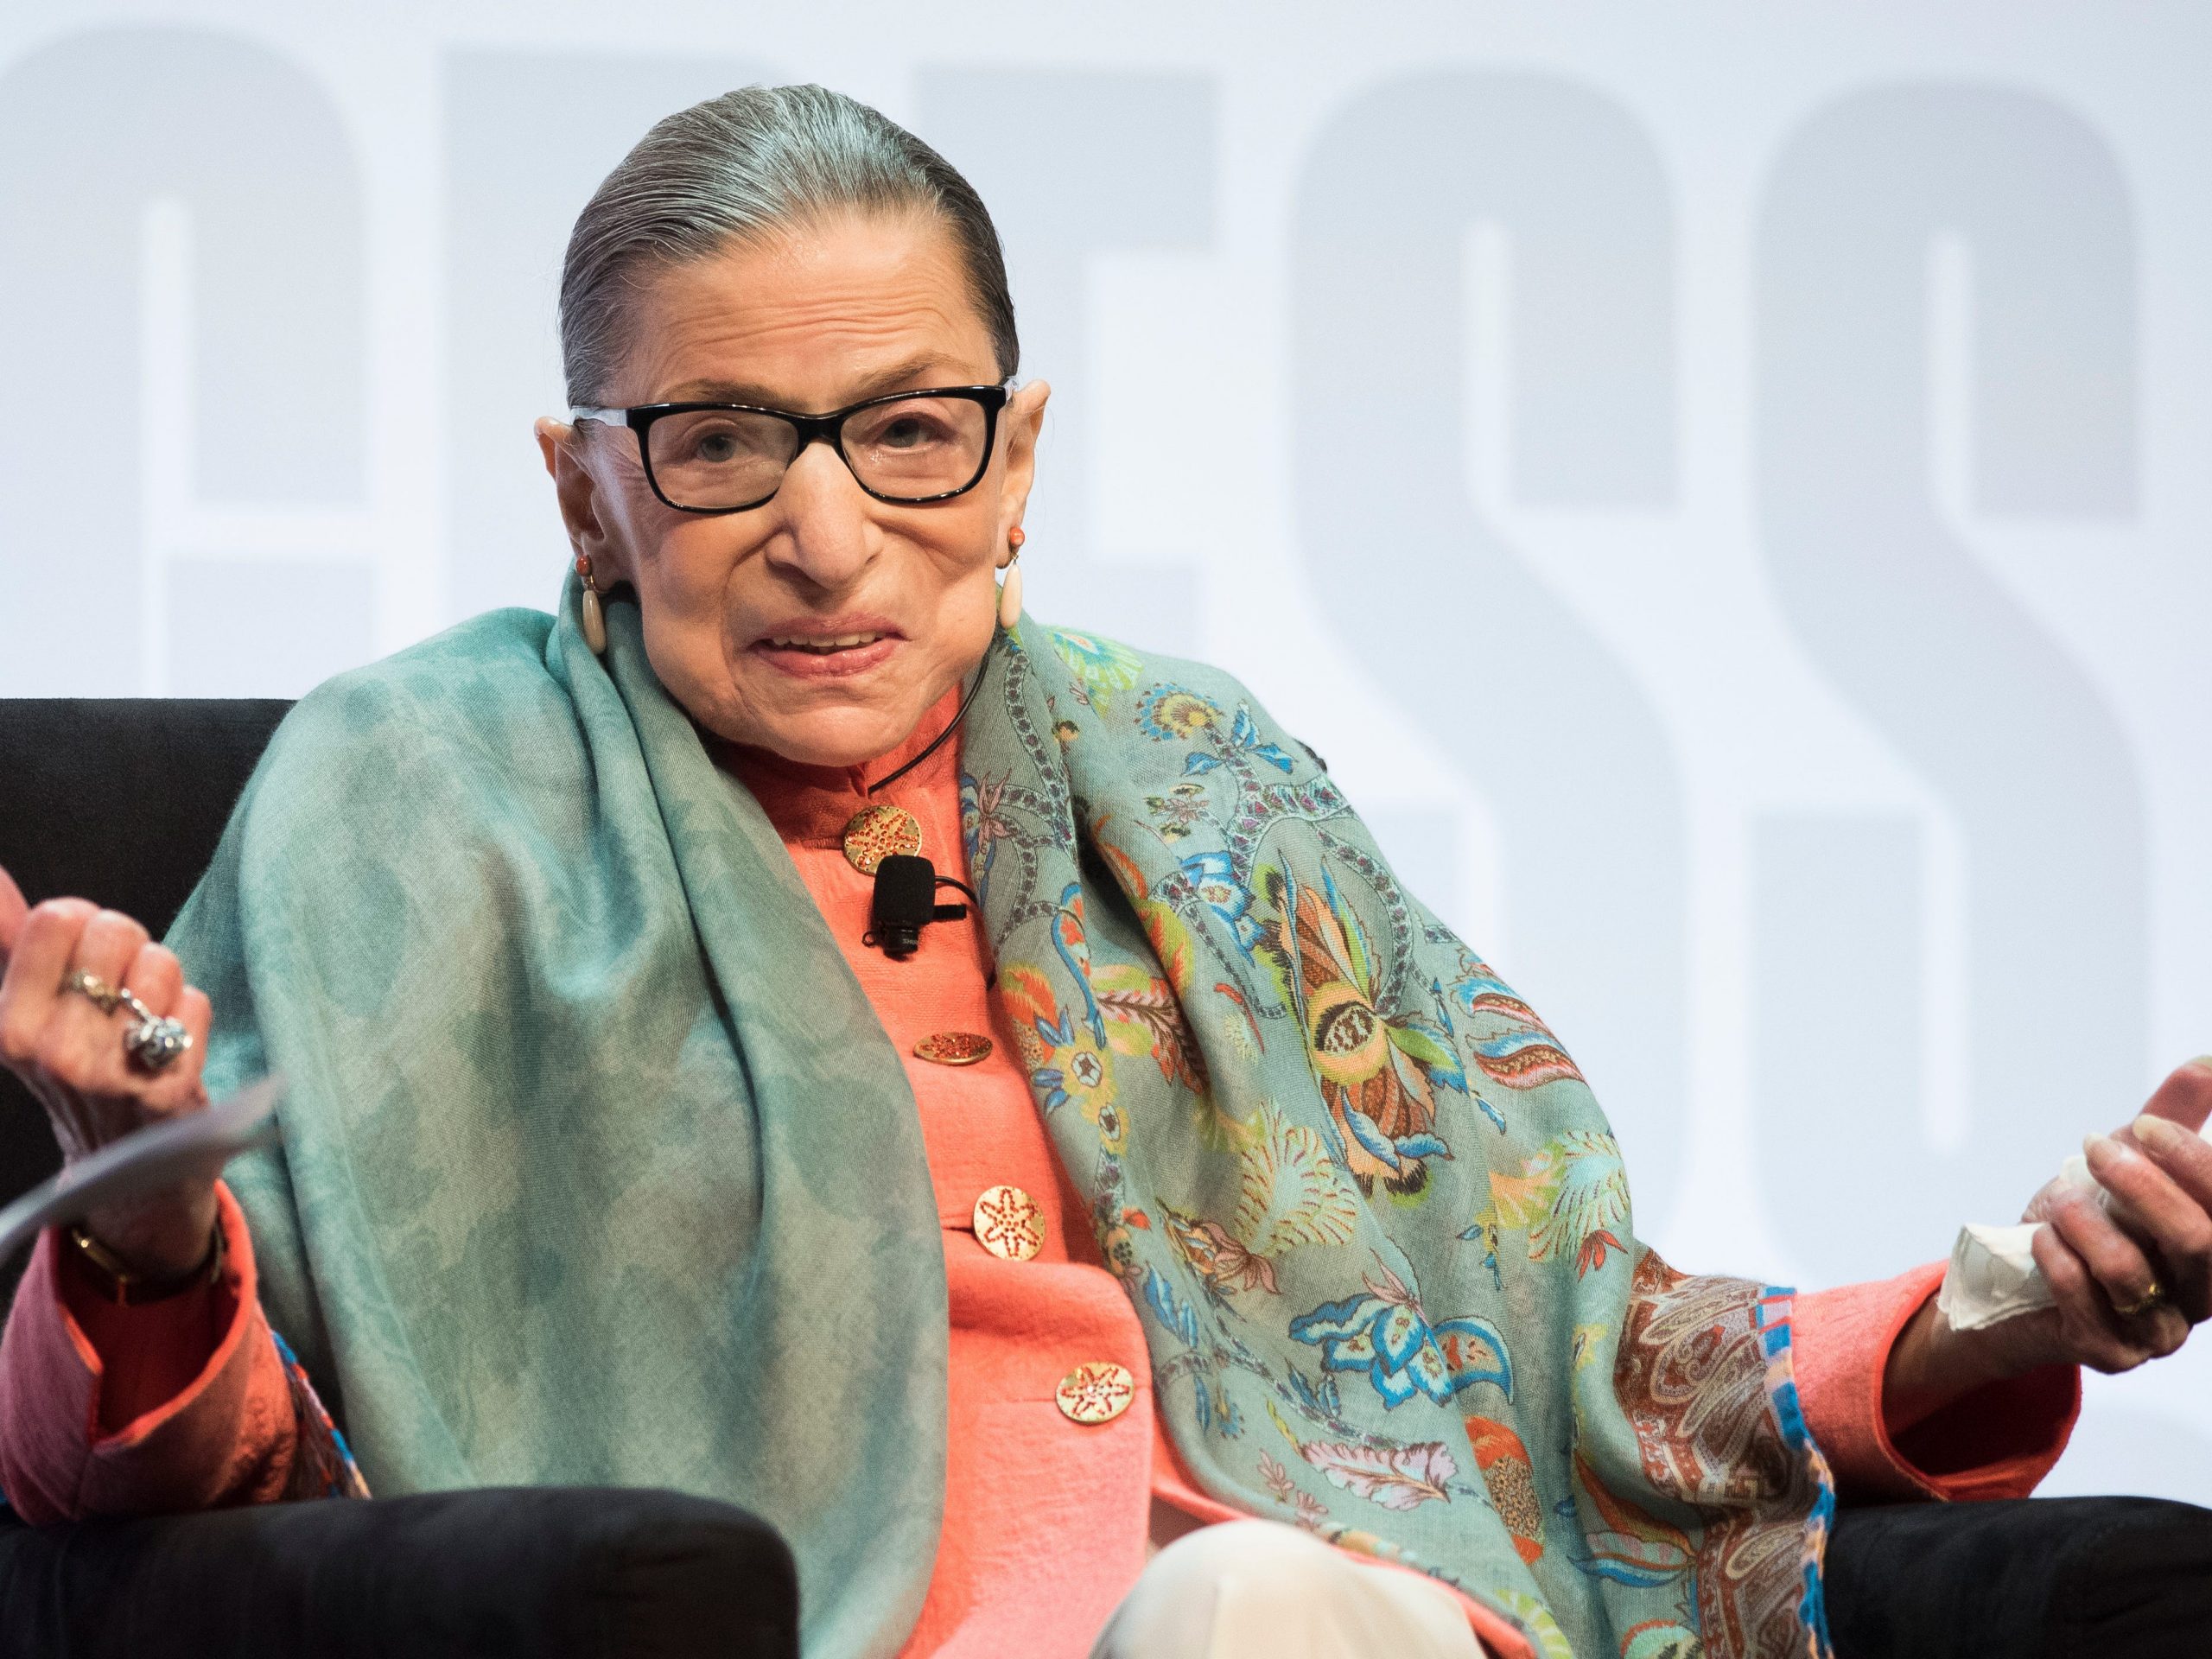 Supreme Court Associate Justice Ruth Bader Ginsburg speaks at the Library of Congress National Book Festival in Washington, Saturday, Aug. 31, 2019. (AP Photo/Cliff Owen)